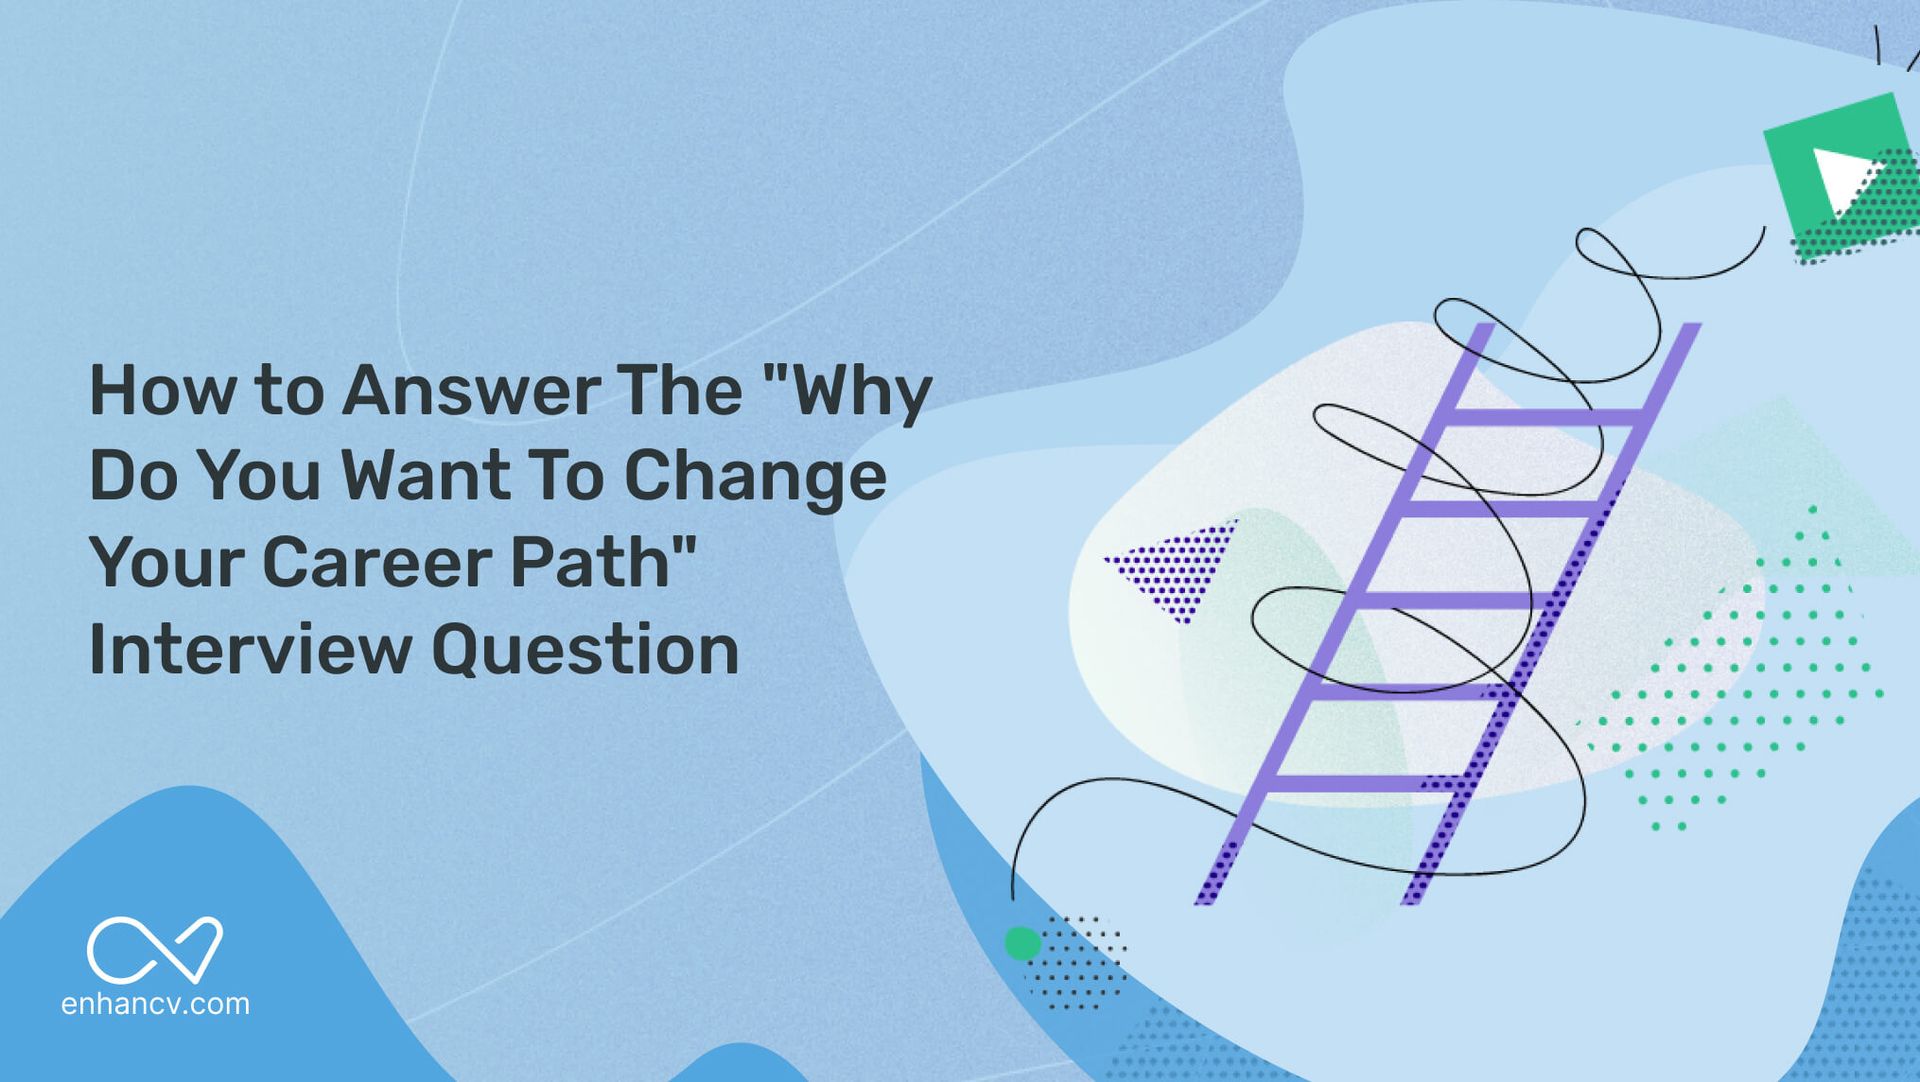 How to Answer The Why Do You Want To Change Your Career Path Interview Question blog image header.jpeg